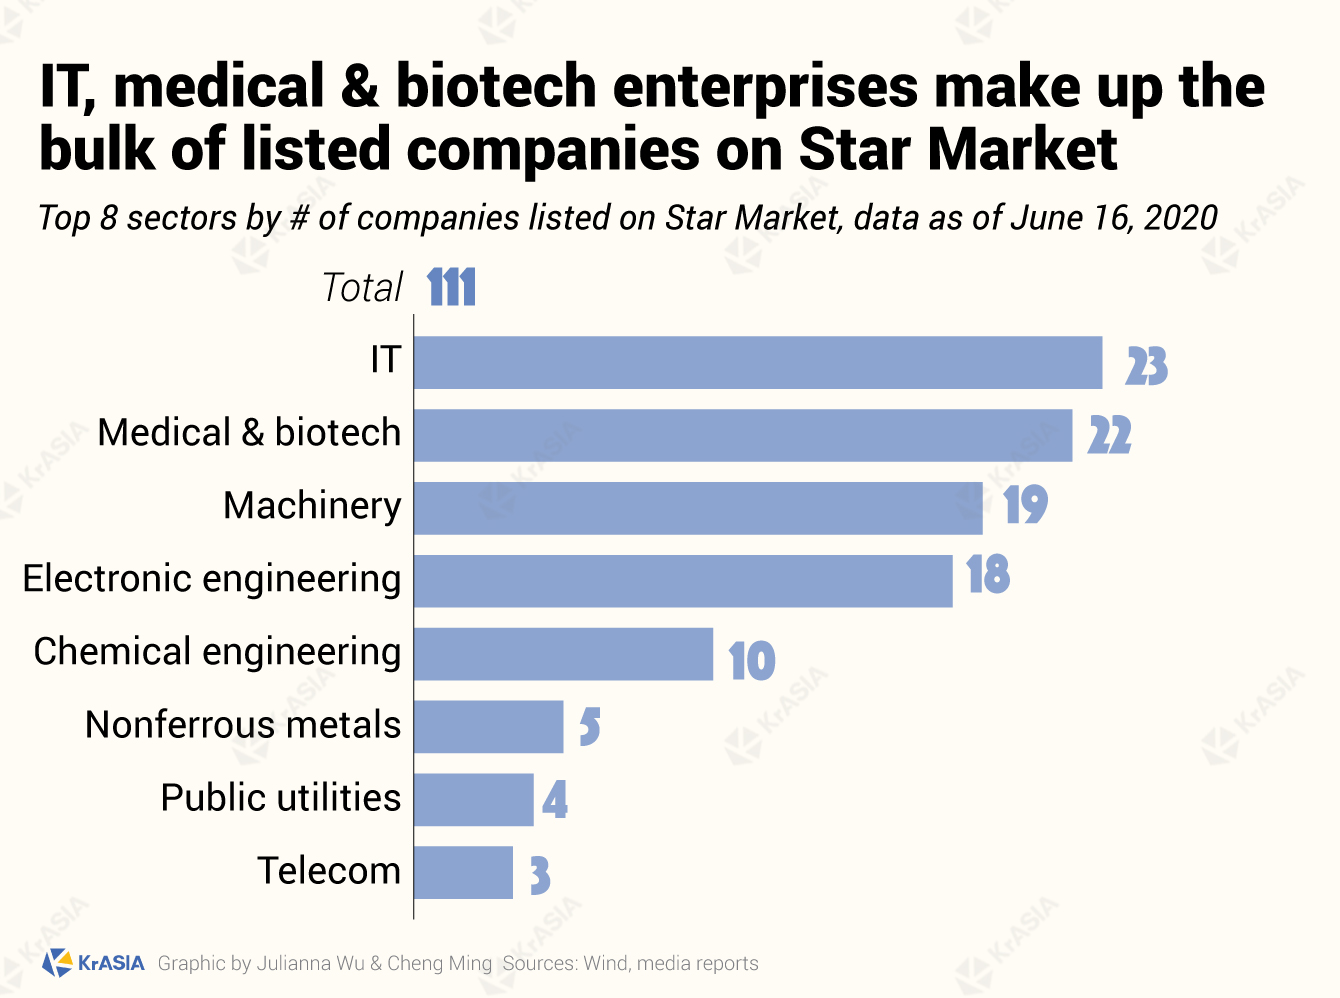 Top 8 sectors by the number of companies listed on Shanghai's Star Market.